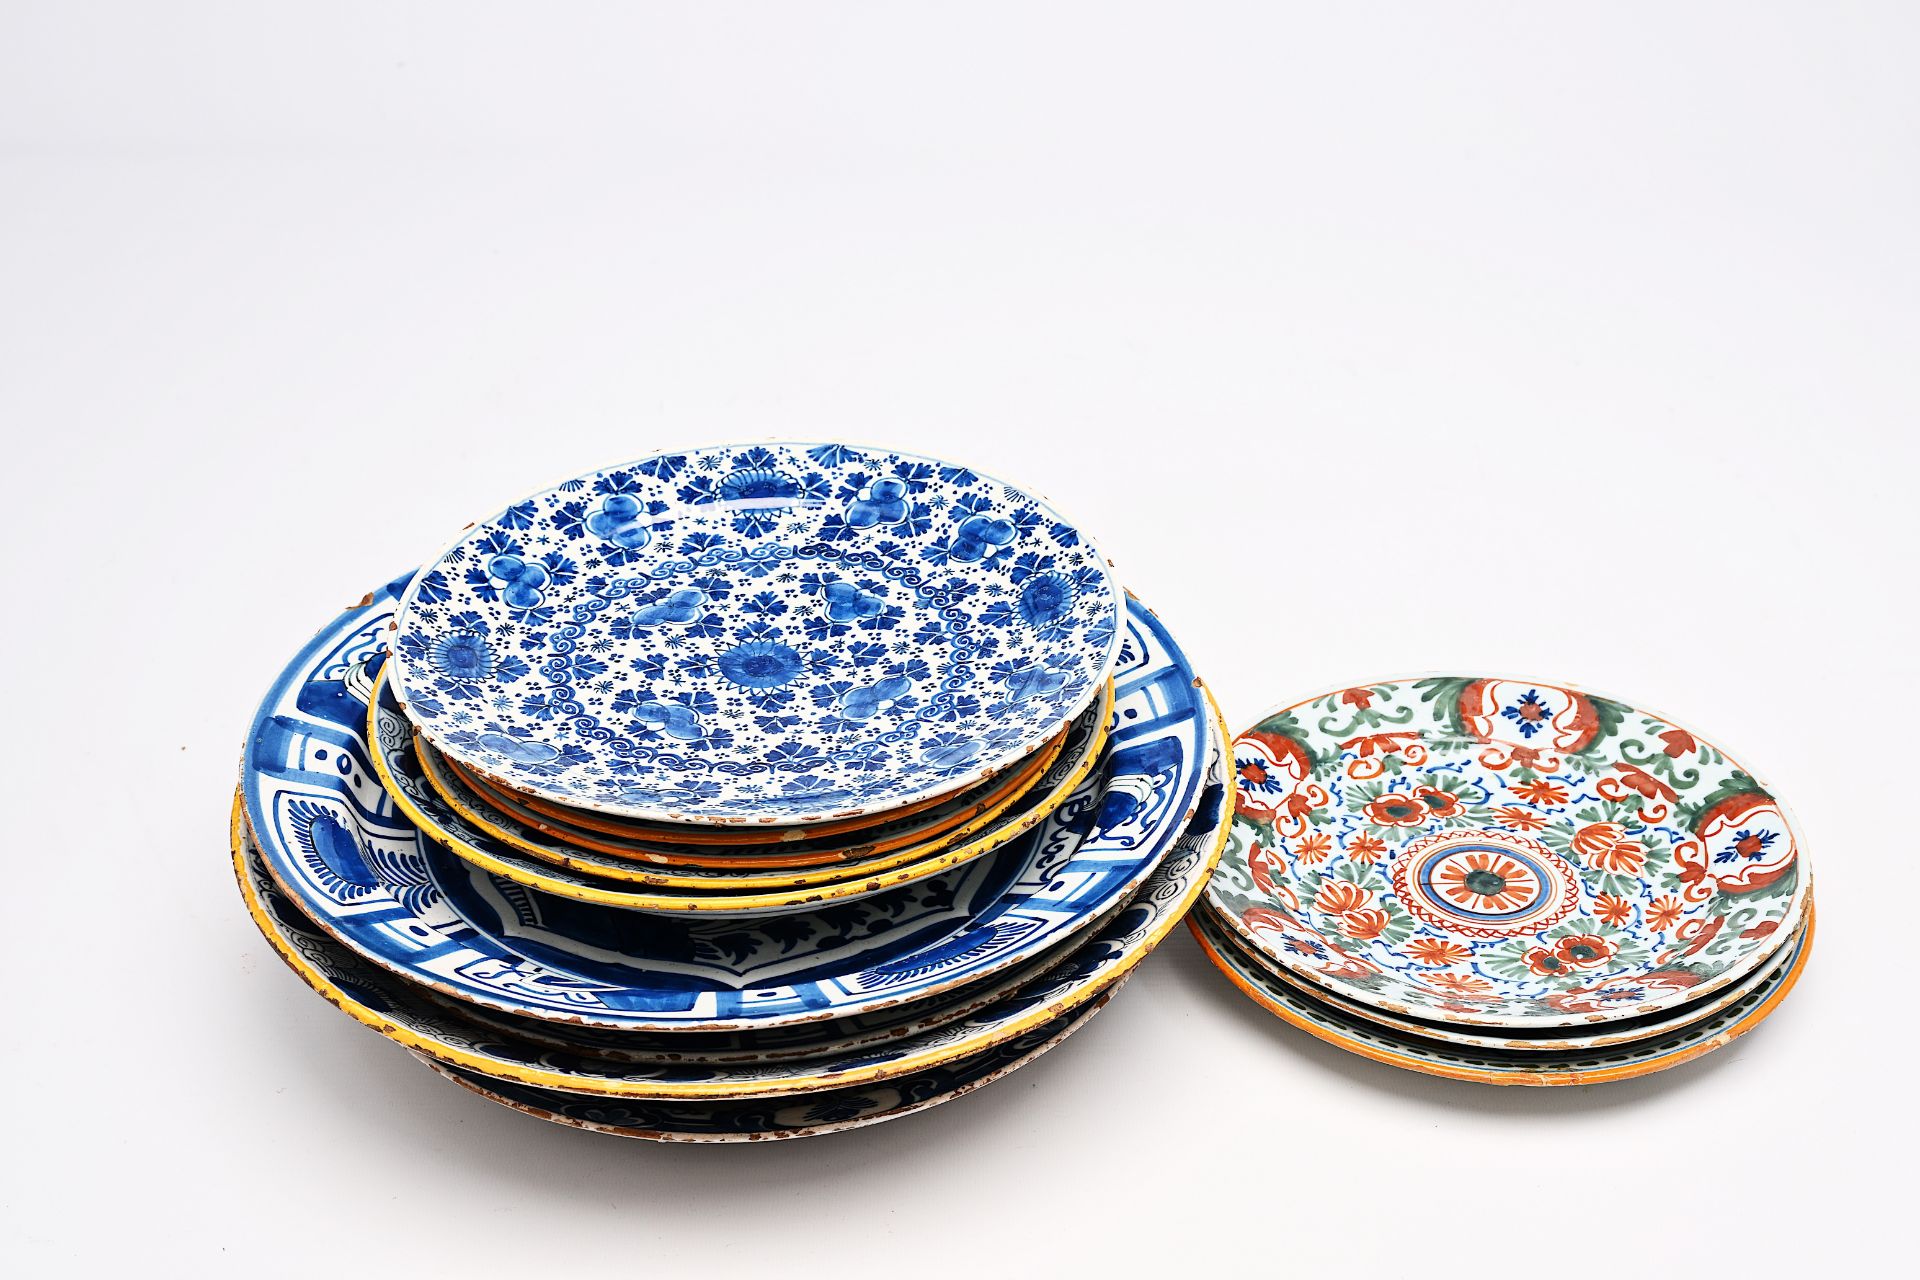 Twelve Dutch Delft blue and white and polychrome plates and dishes, 18th C. - Image 7 of 7